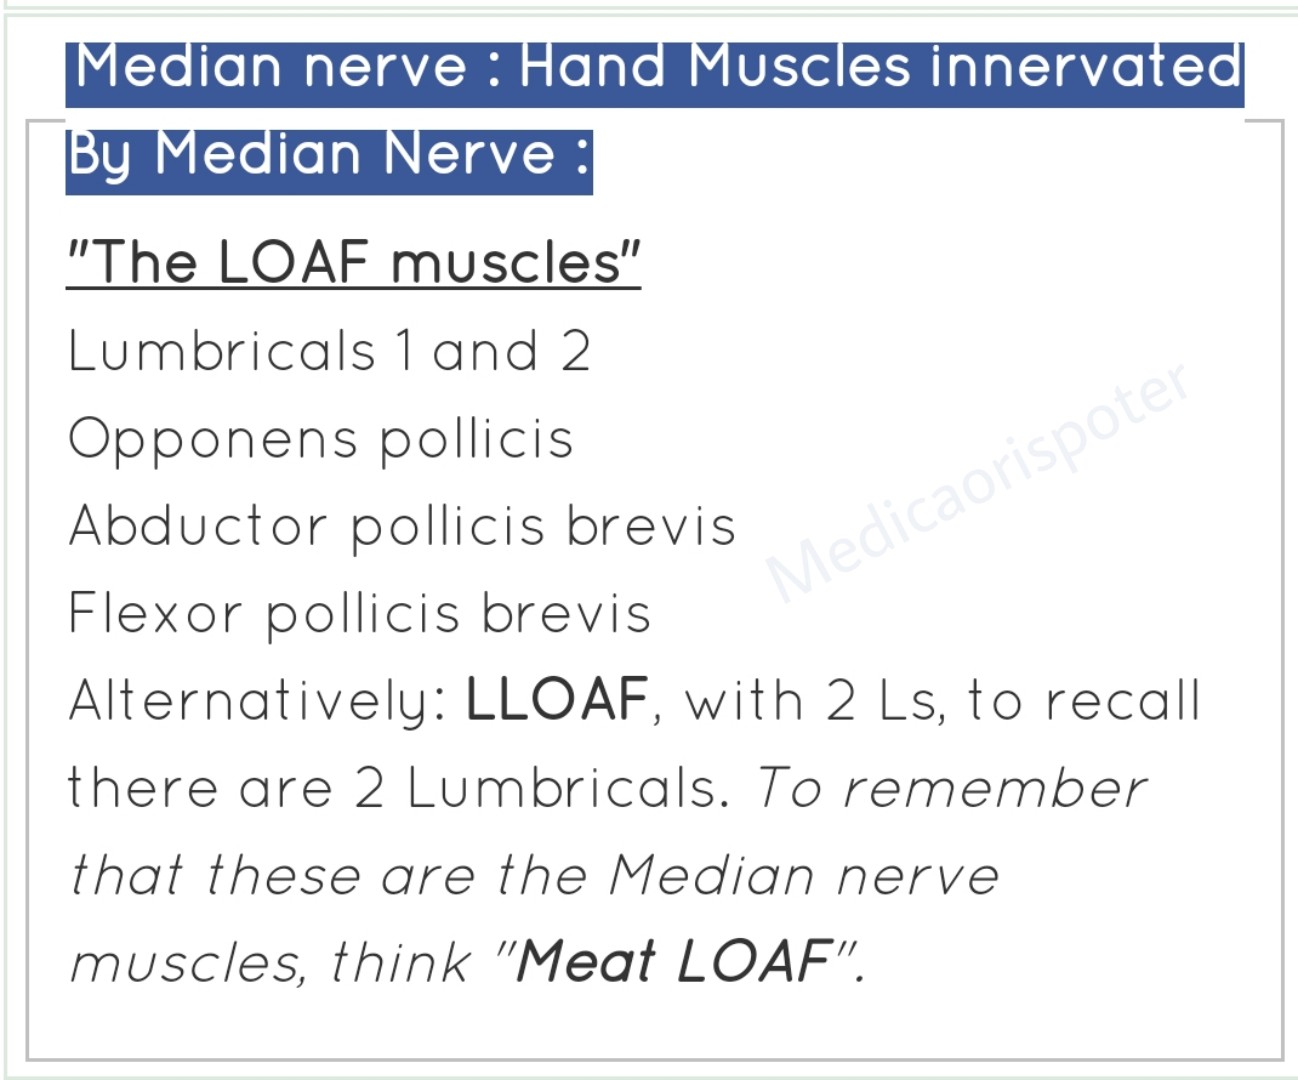 Hand Muscles innervated By Median Nerve